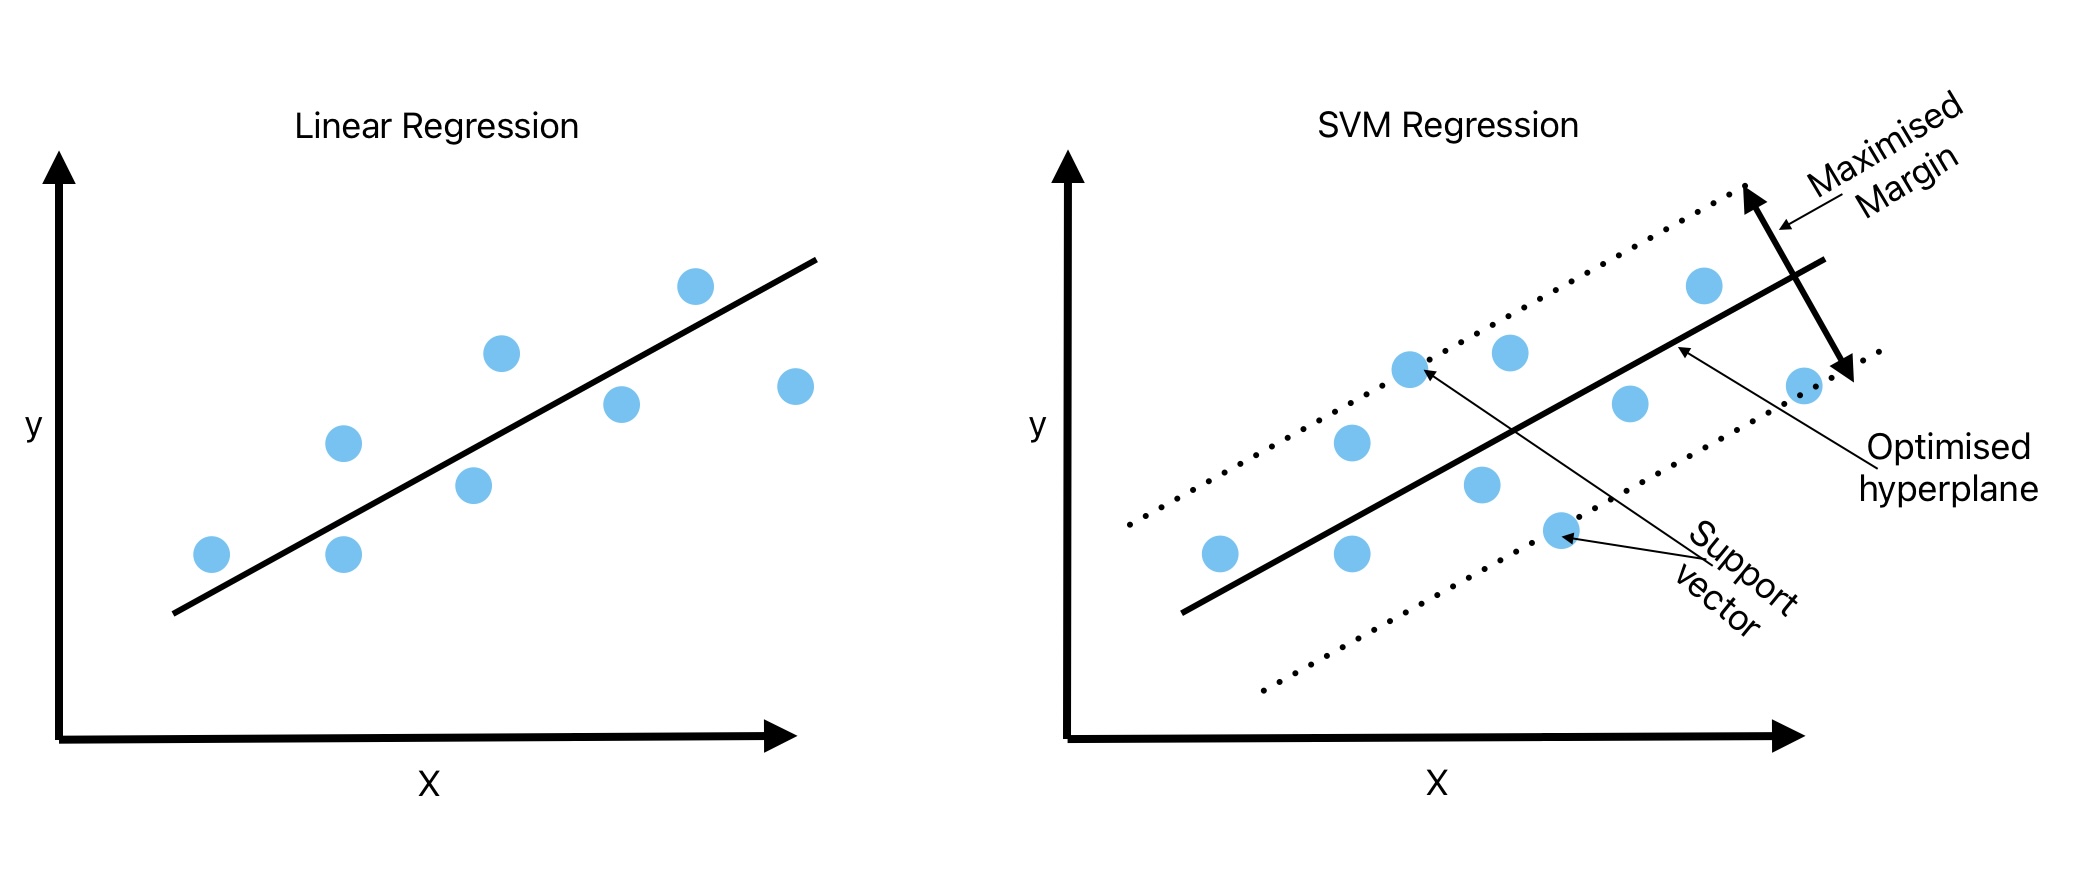 This image shows the difference between linear and SVM Regression